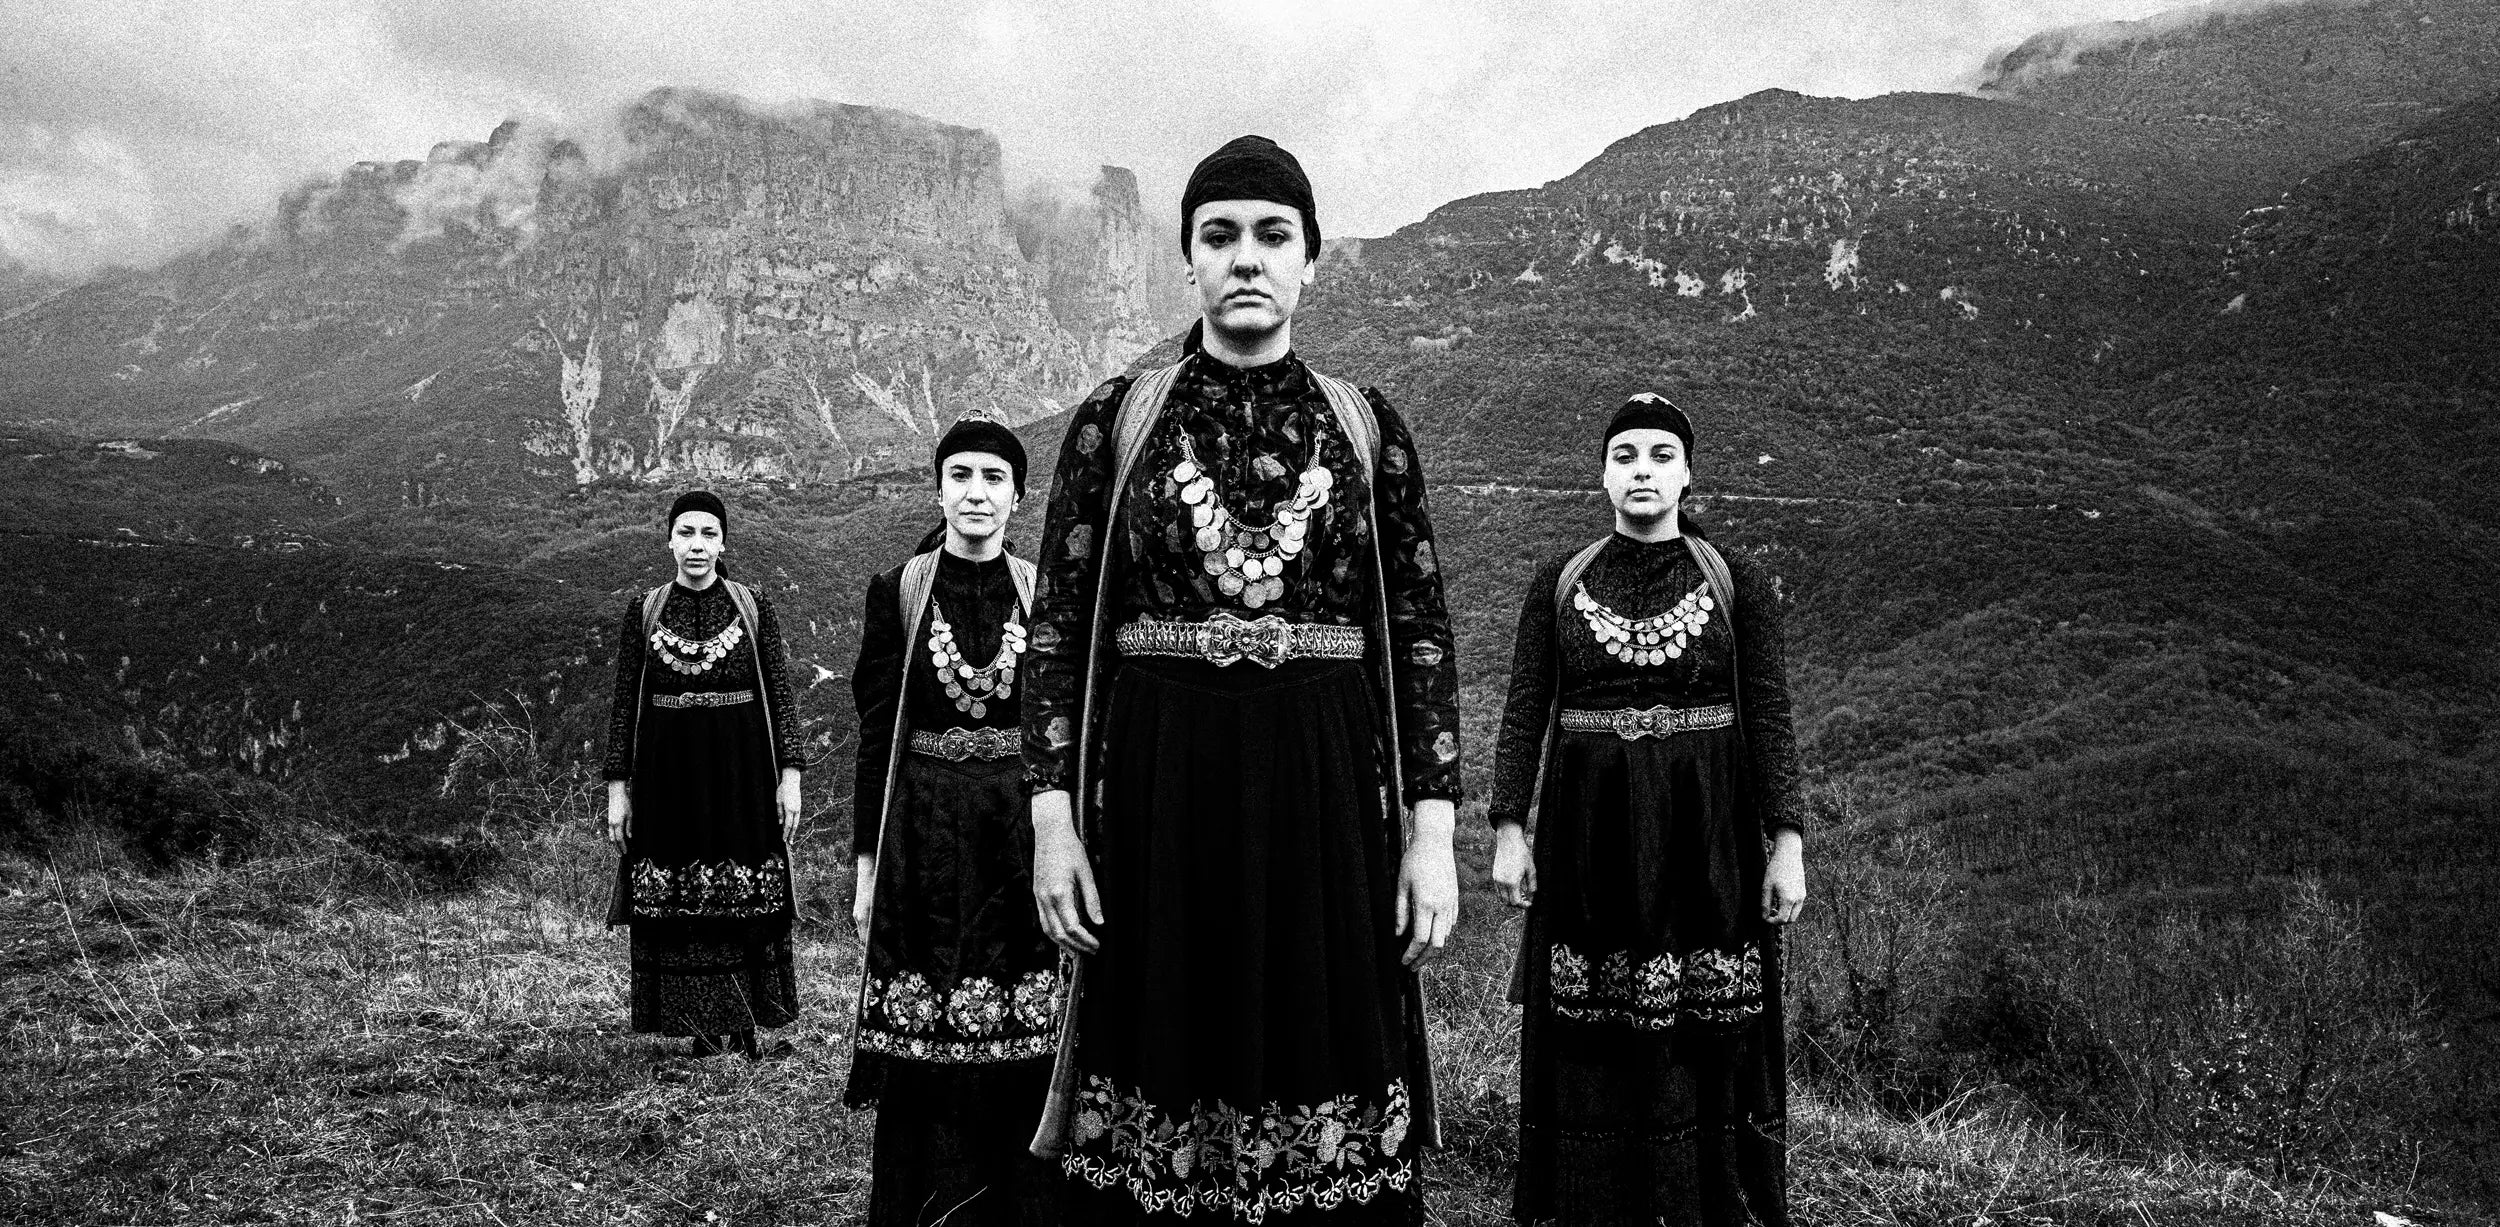 Women in folklore dresses at Zagori, Greece. Black and white photograph by George Tatakis